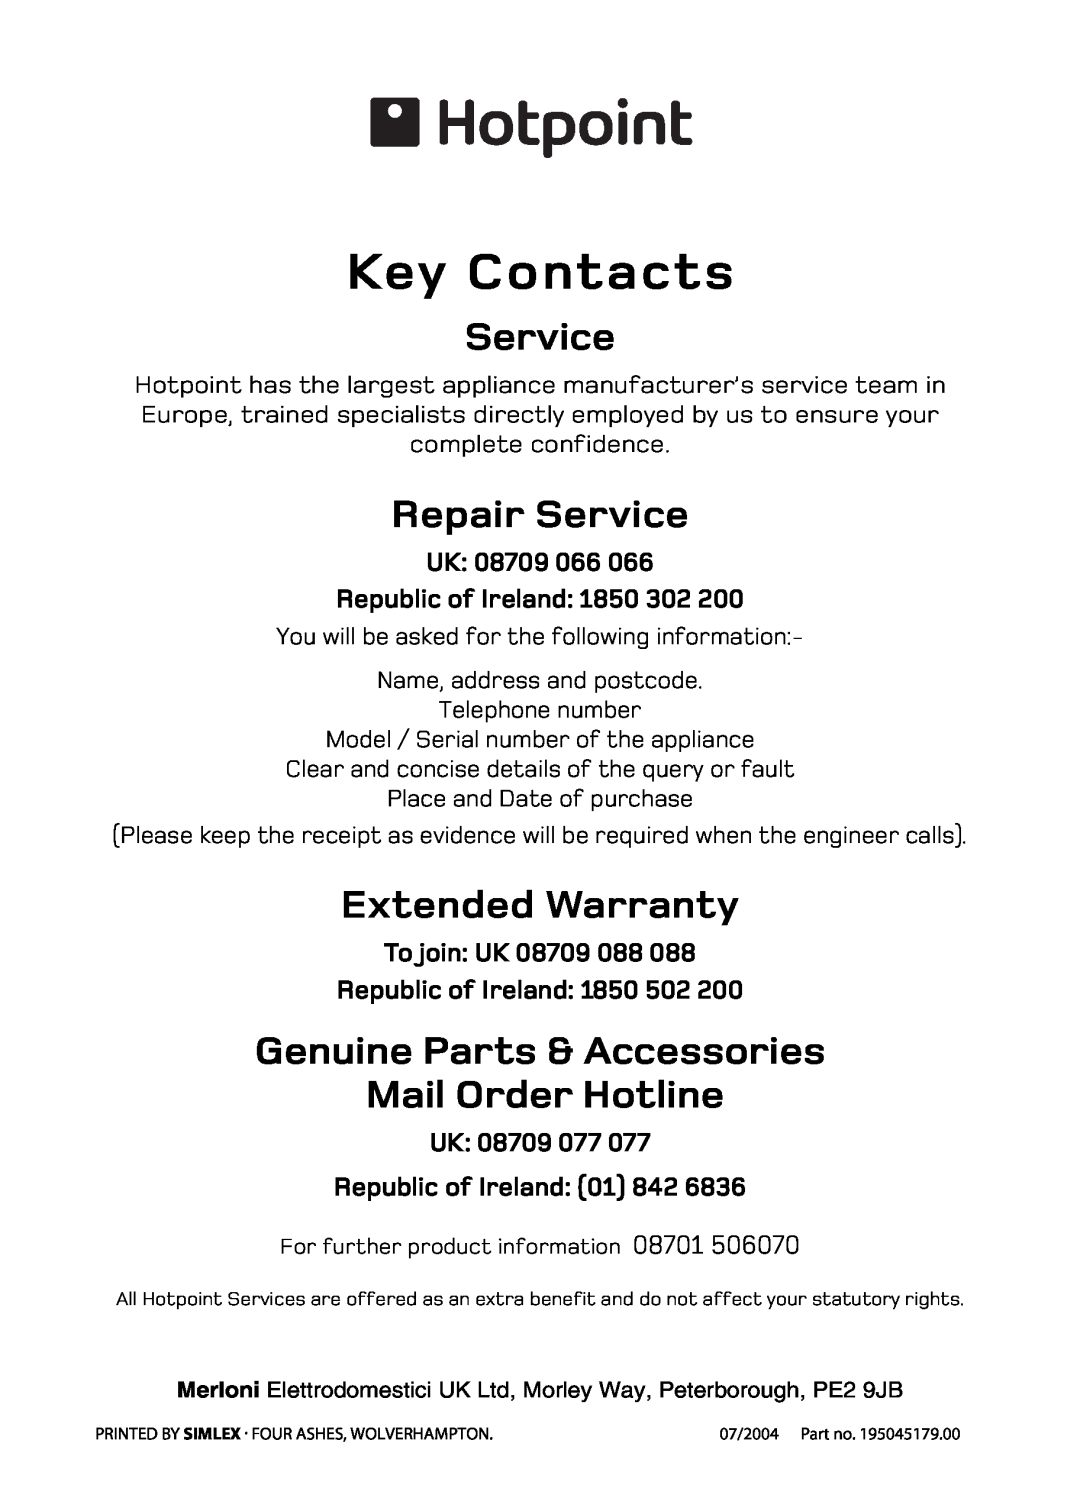 Hotpoint 5TCC manual Repair Service, Extended Warranty, Genuine Parts & Accessories Mail Order Hotline, To join UK 